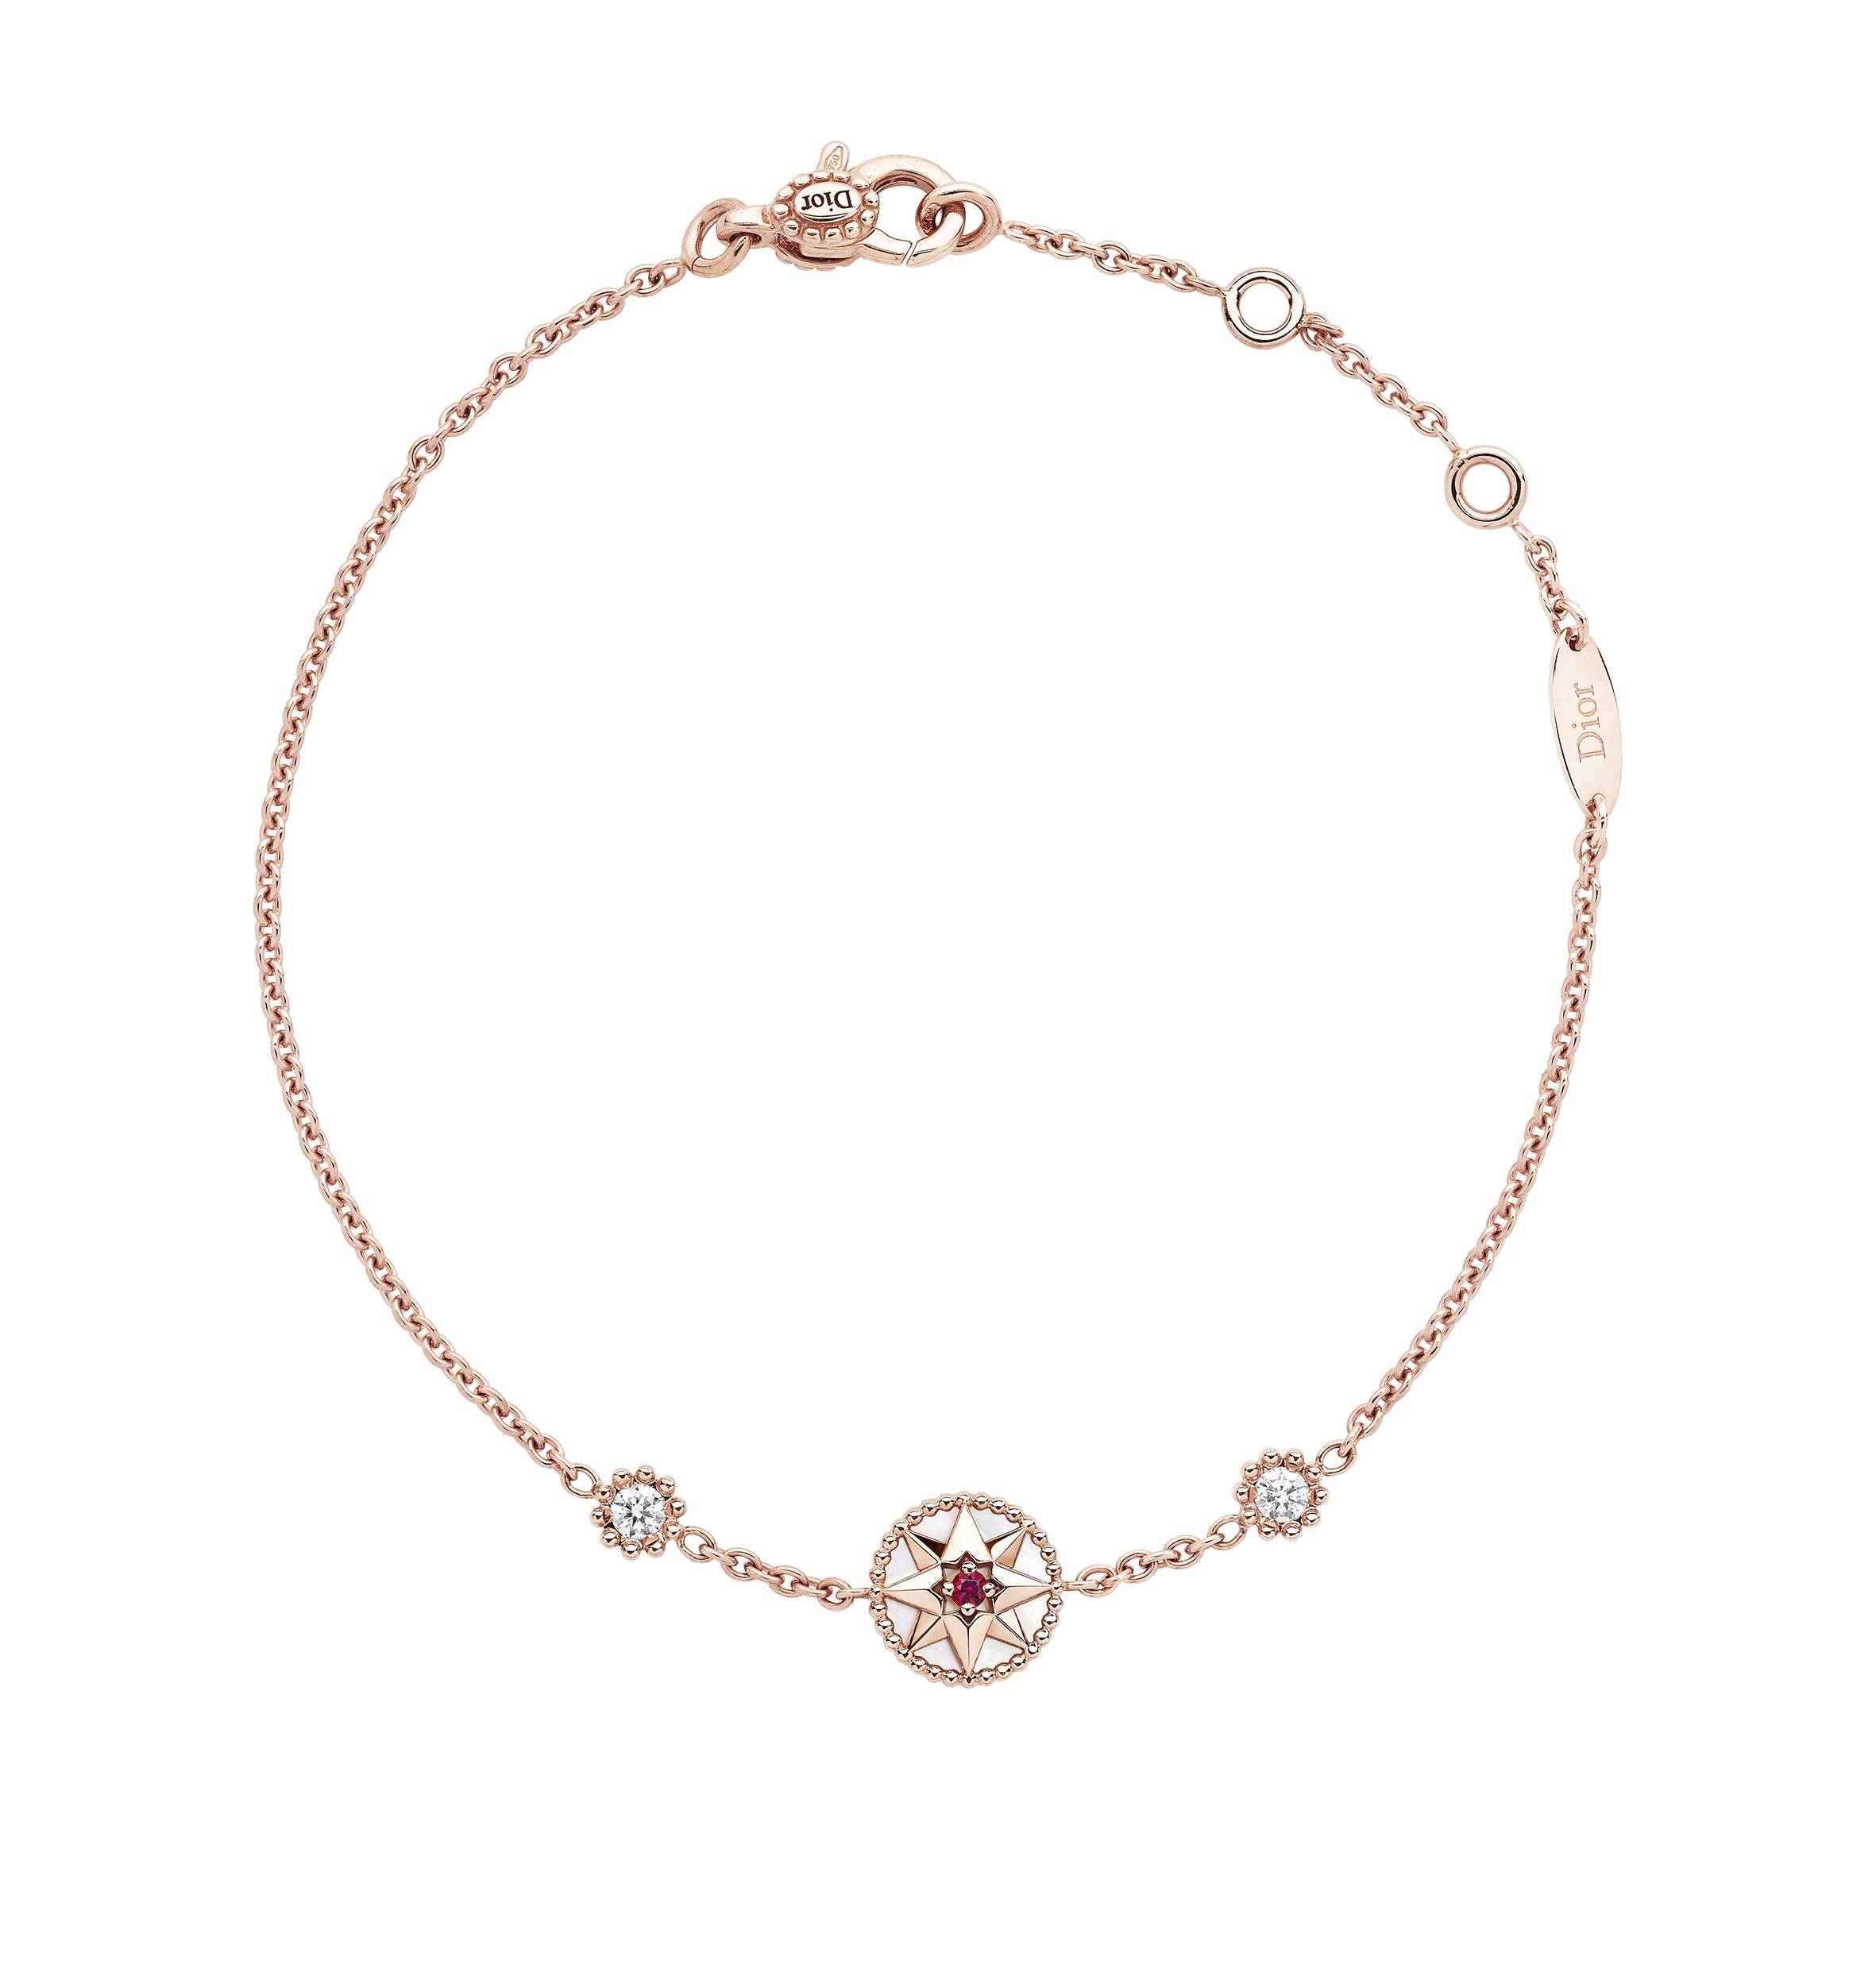 ROSE DES VENTS BRACELET Pink Gold with Diamonds and a Ruby $17,300